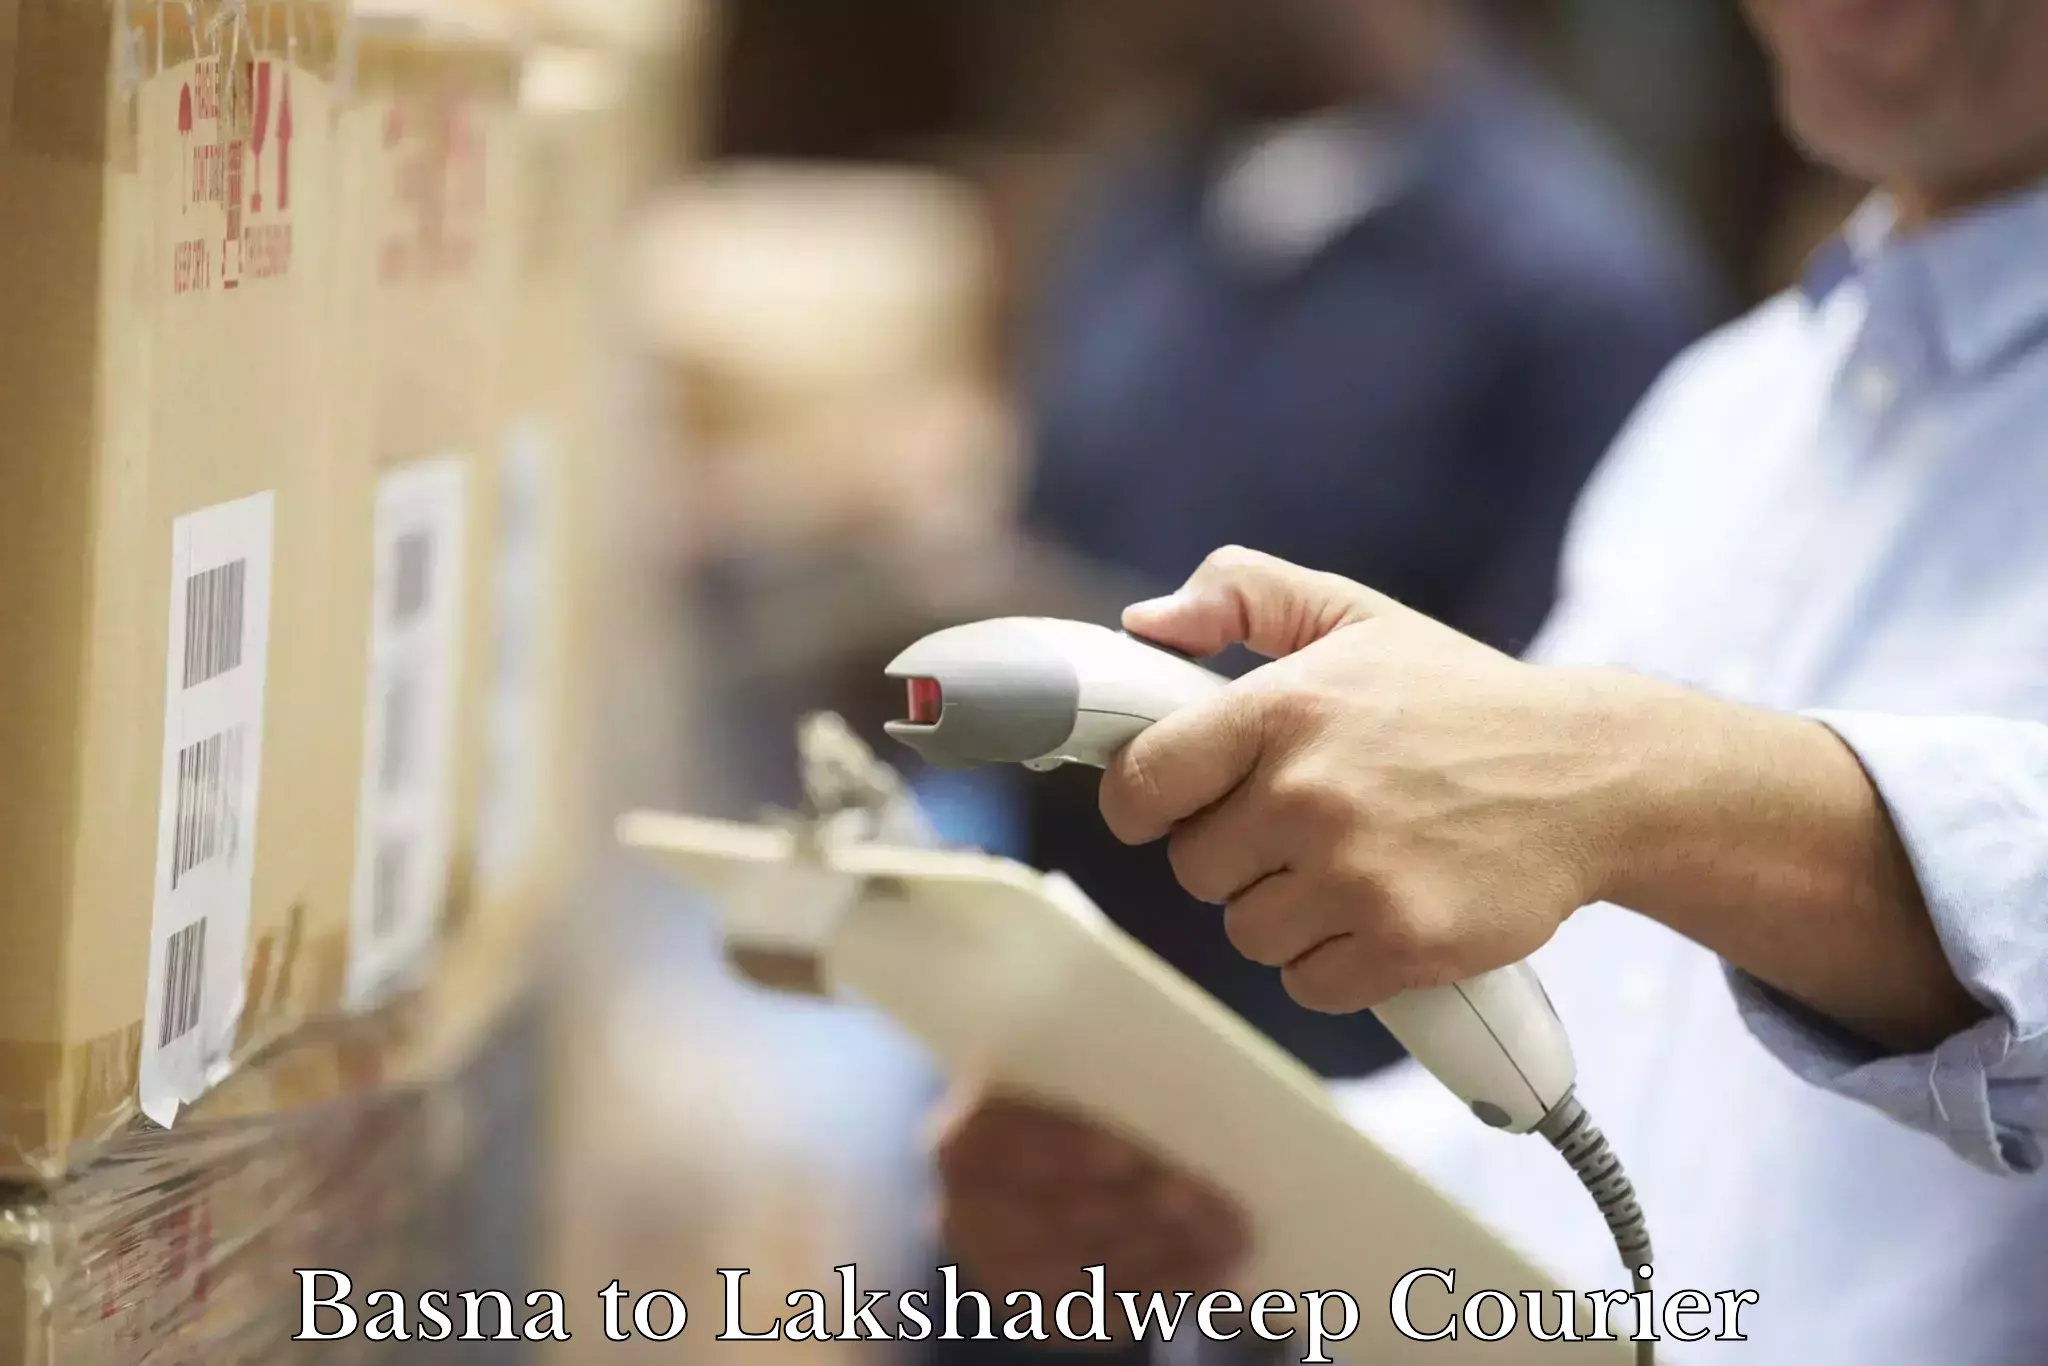 Courier tracking online Basna to Lakshadweep